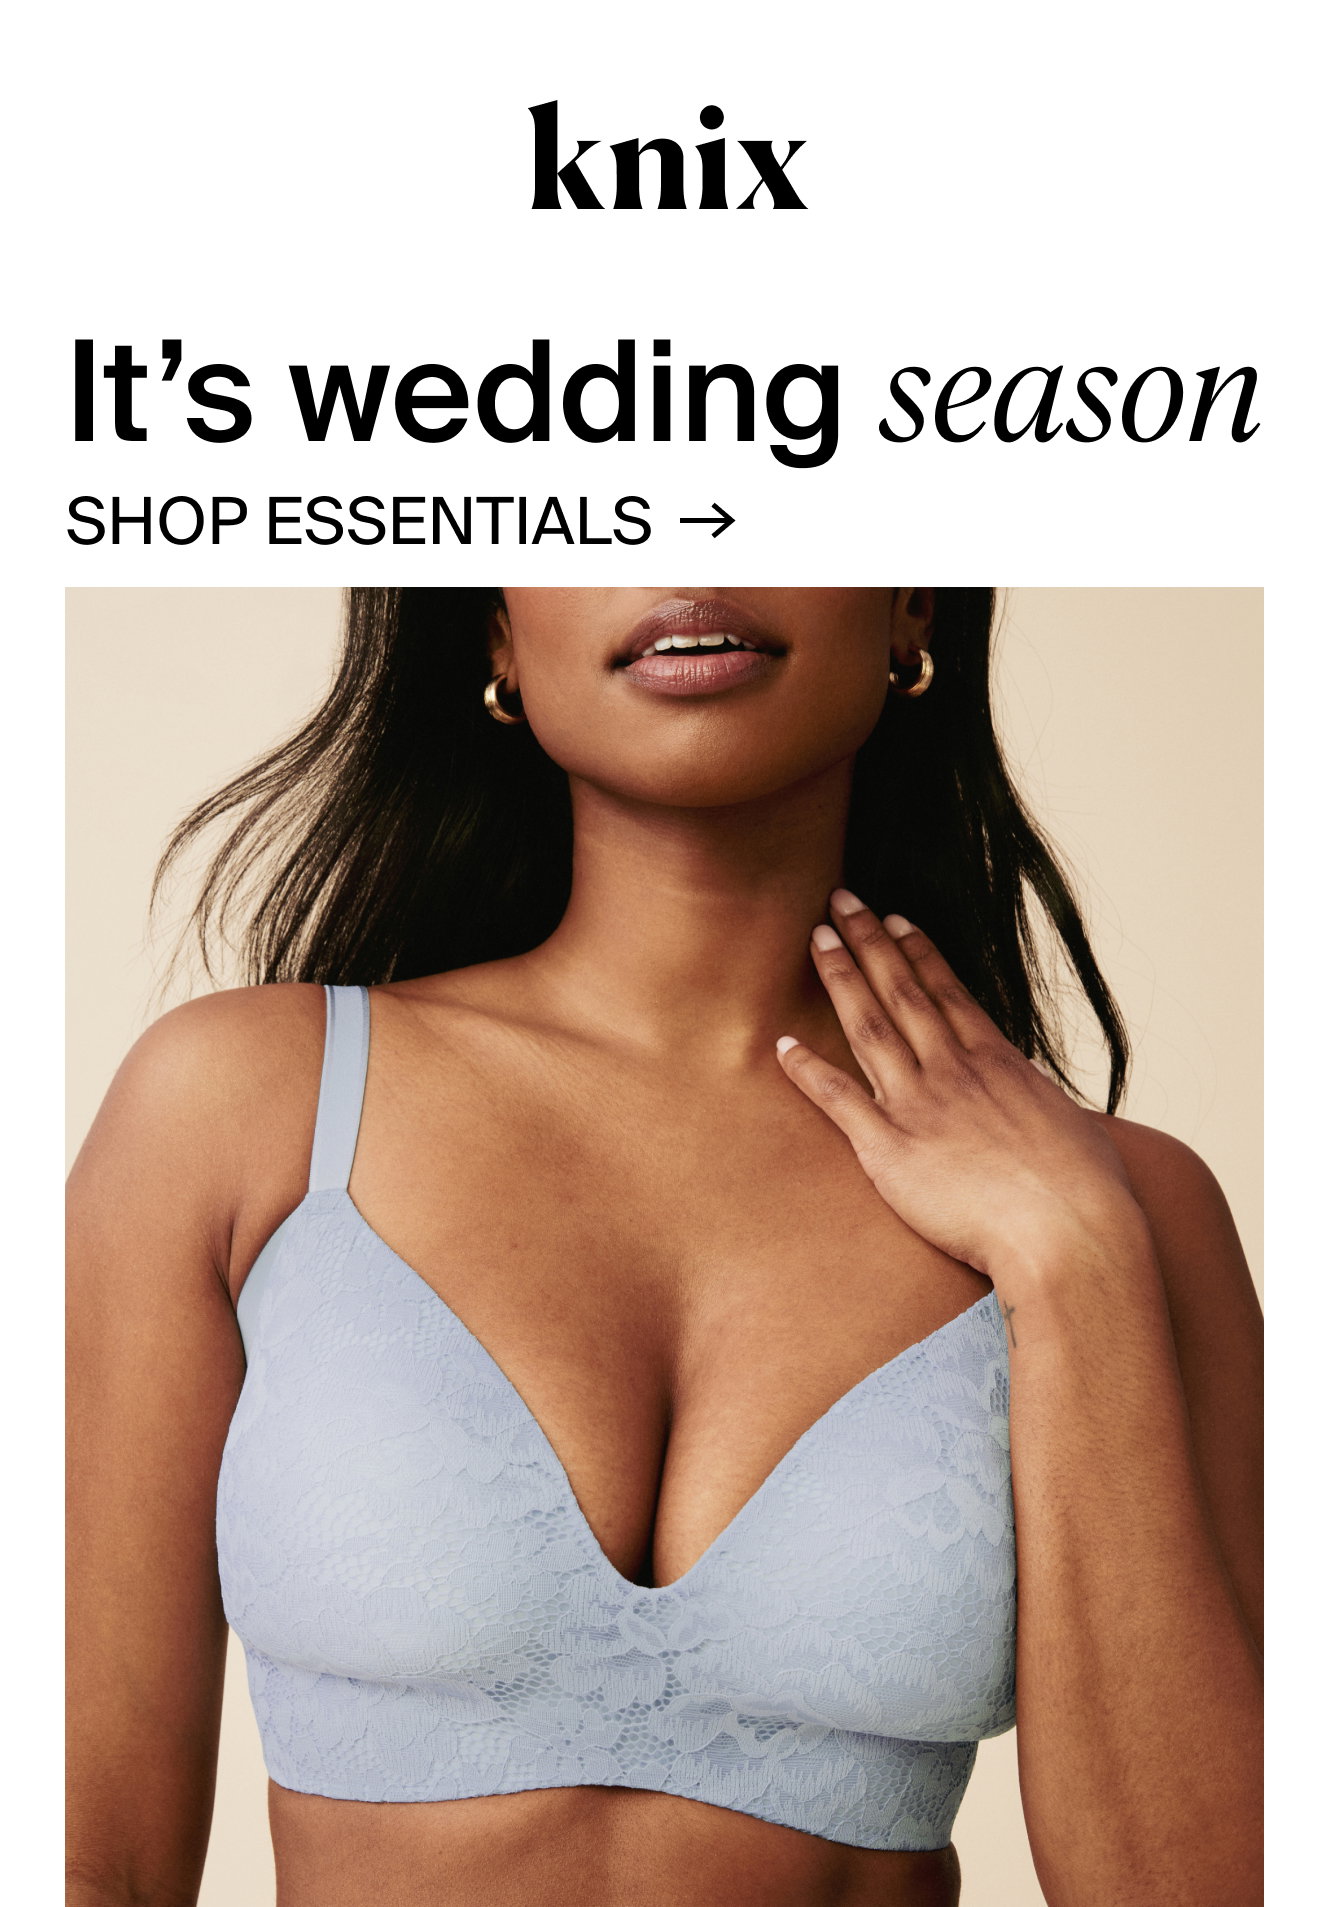 Knix CA: The Wedding Shop is open